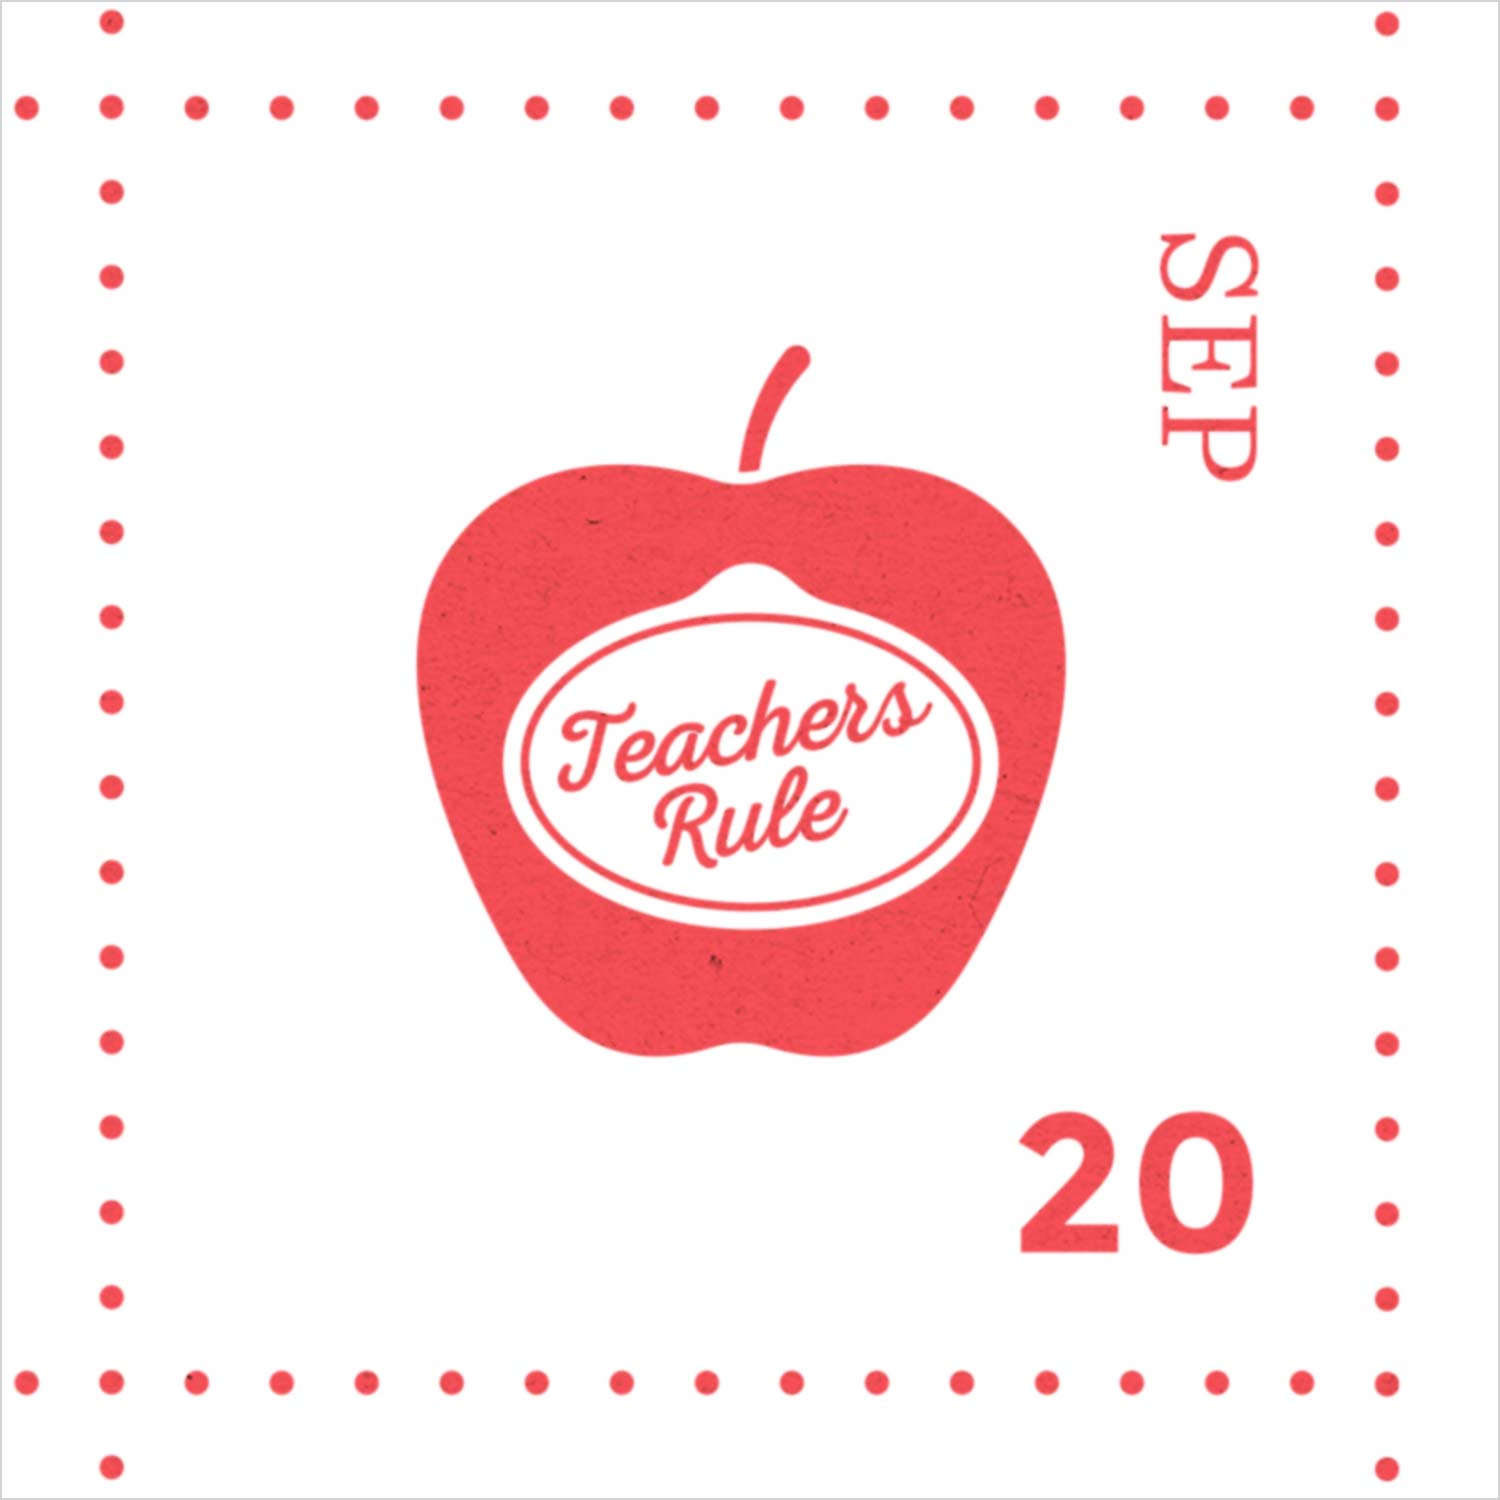 September shows an apple with the motif Teachers Rule mounted on a fruit sticker.